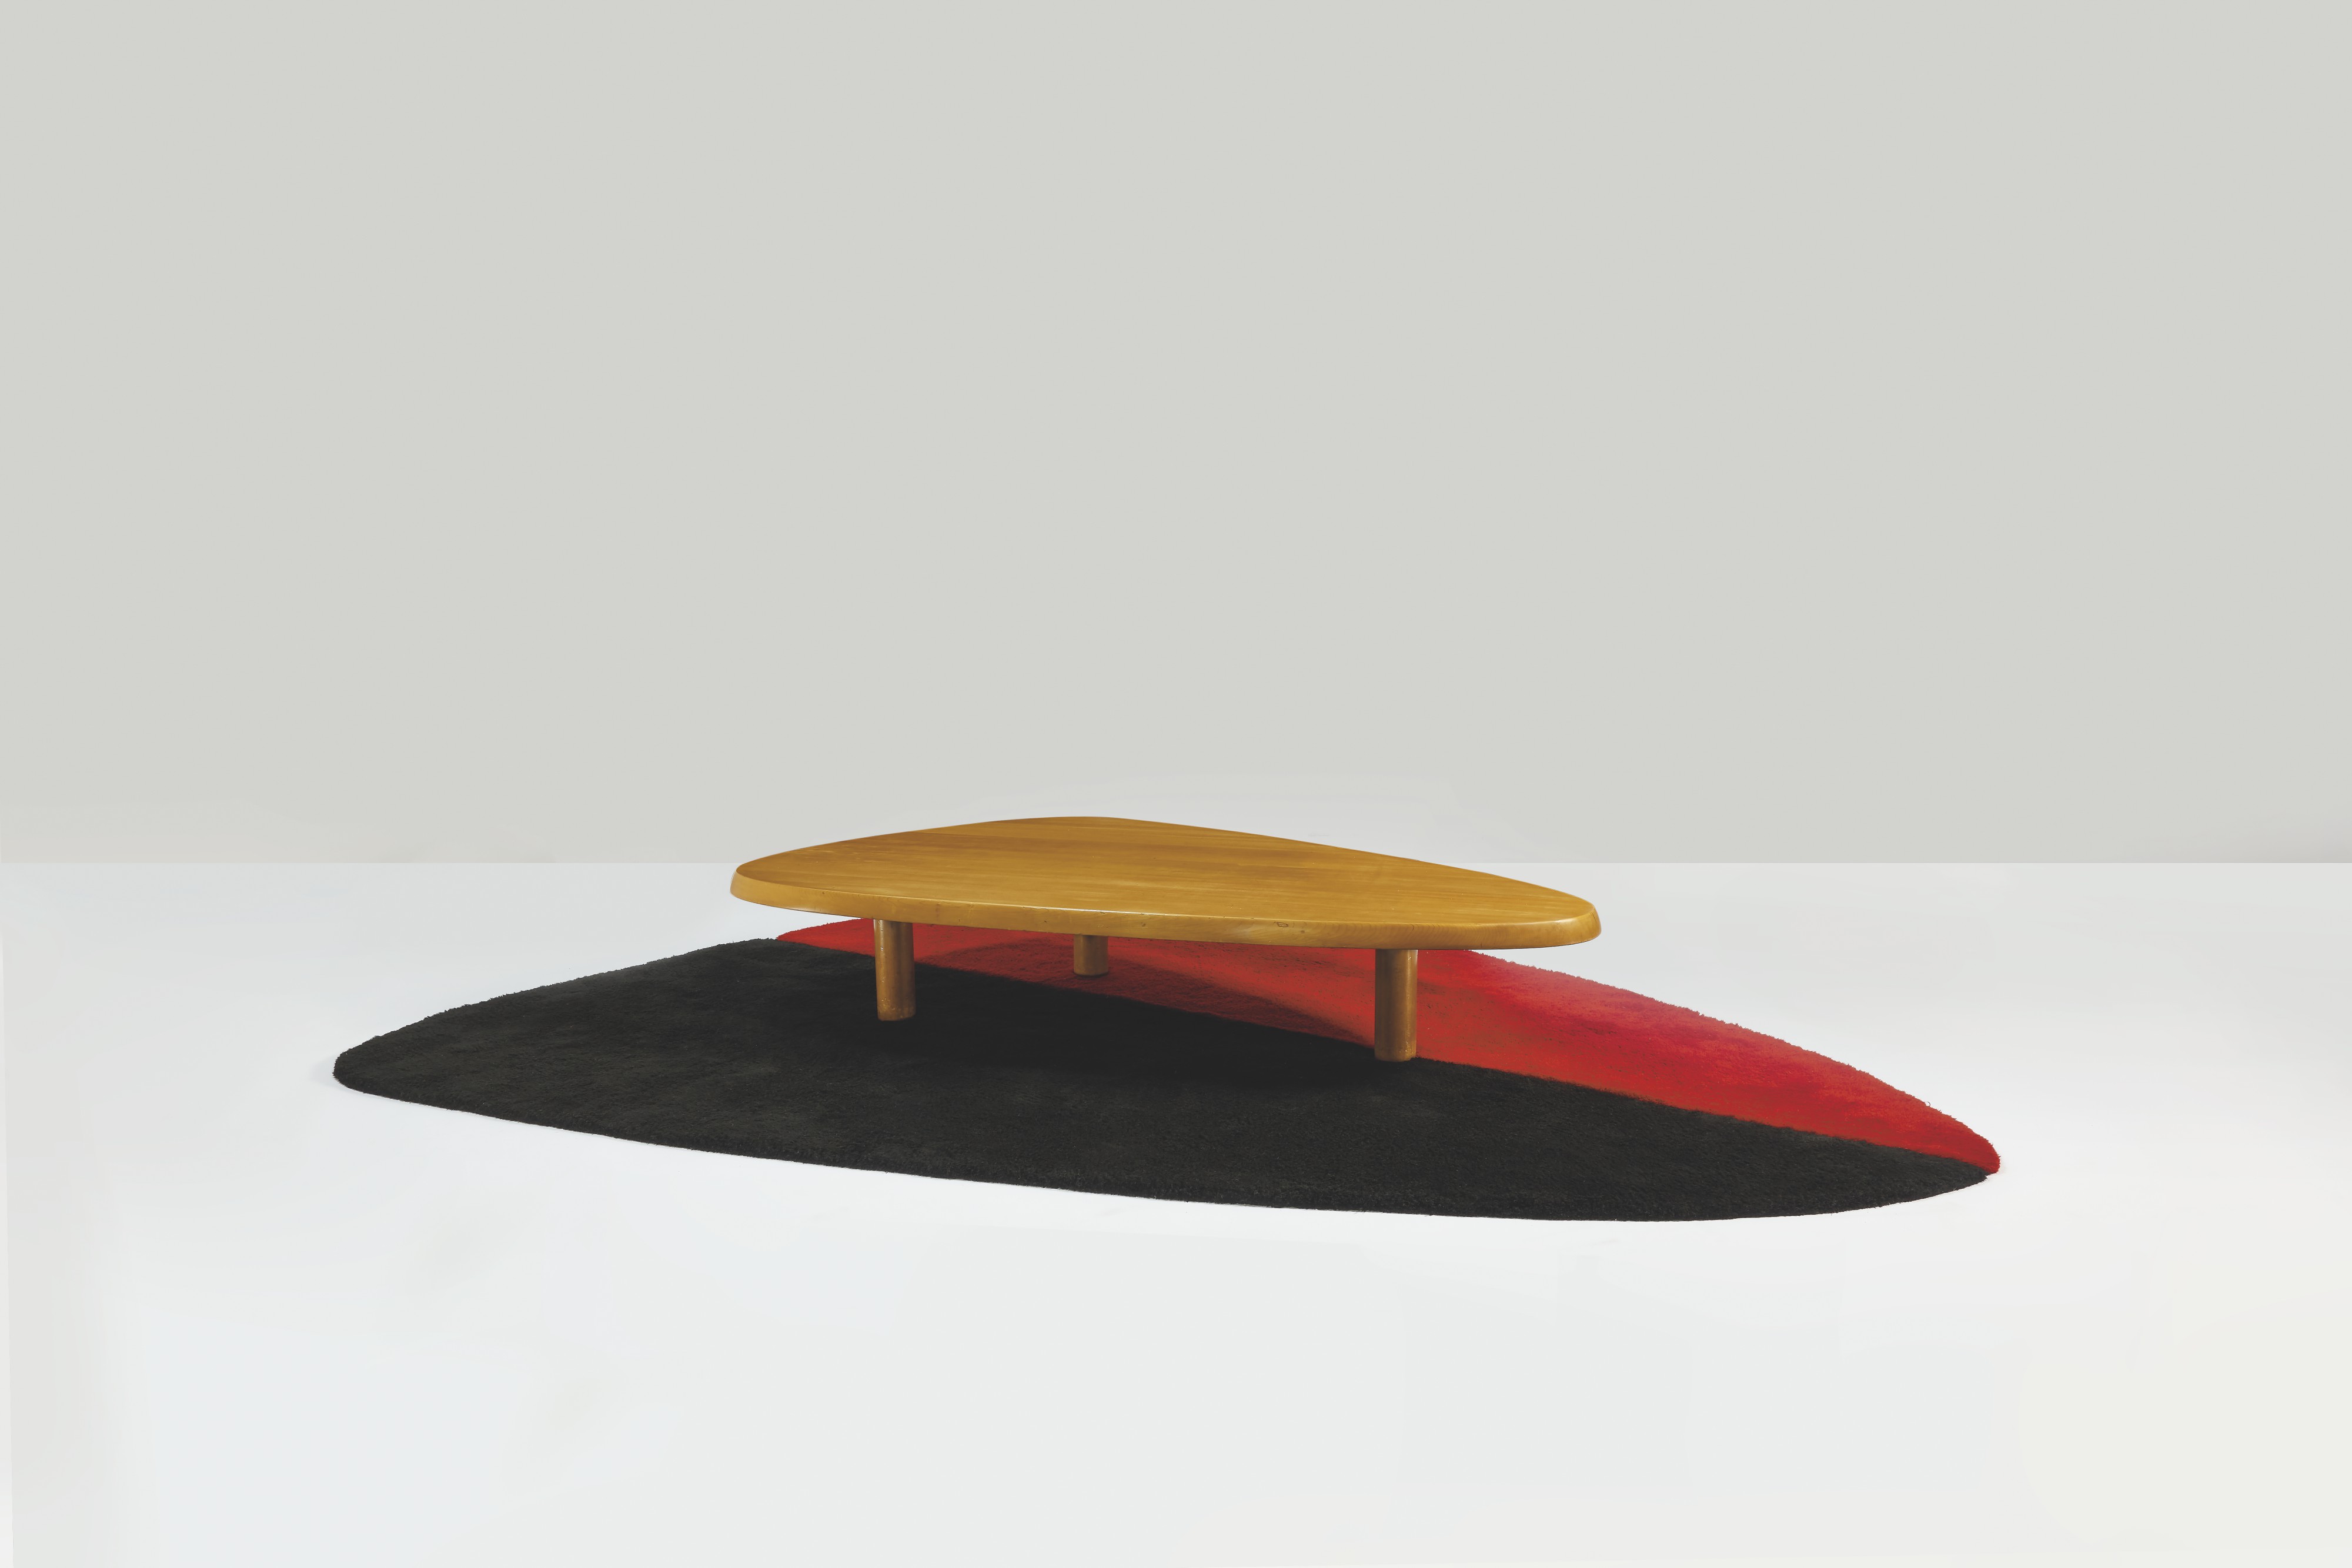 CHARLOTTE PERRIAND (1903-1999)  'Enforme' low table hinoki cypress and Manchurian walnut  14.5/8 x 78.1/2 x 45.5/8 in. (38 x 199.5 x 116 cm.)  Executed in 1954.  Estimate: €400,000-600,000